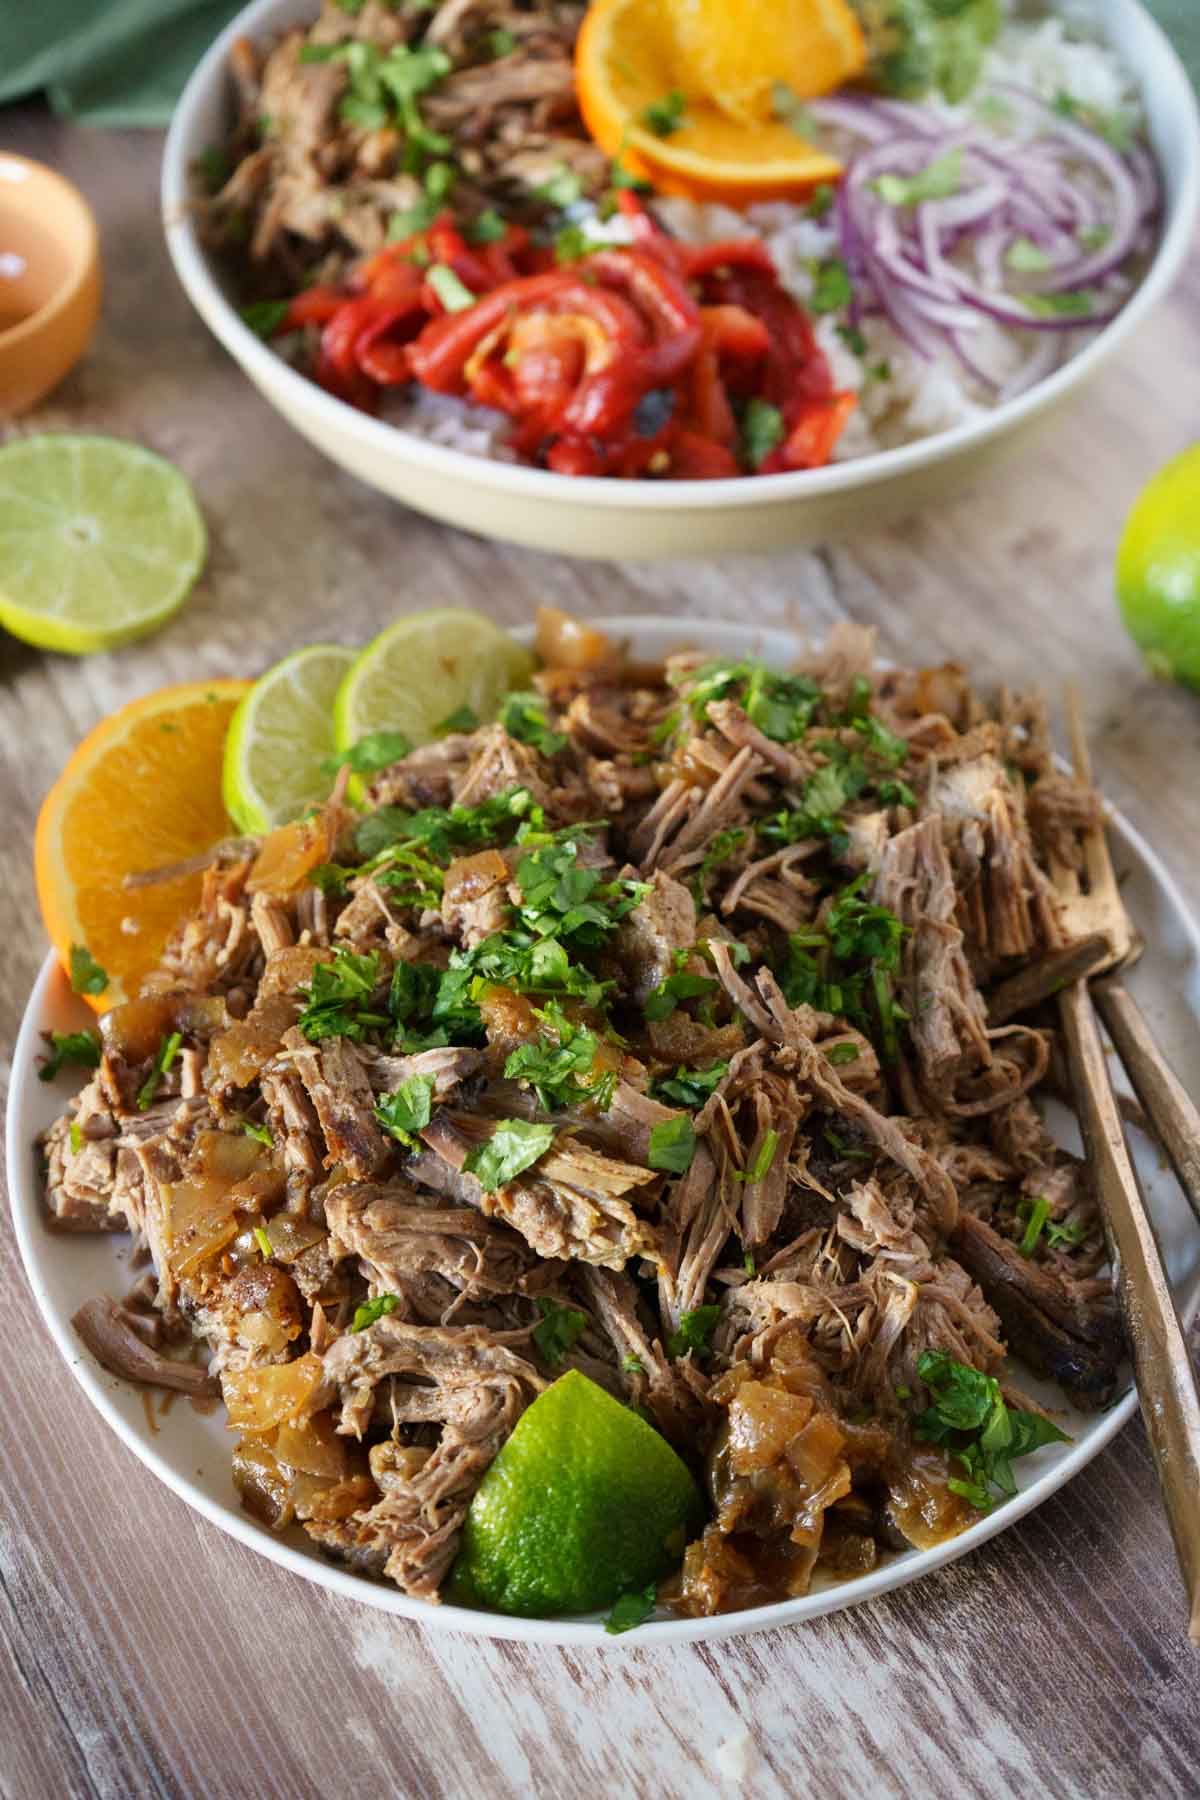 Shredded beef with garnished with cilantro on a plate.